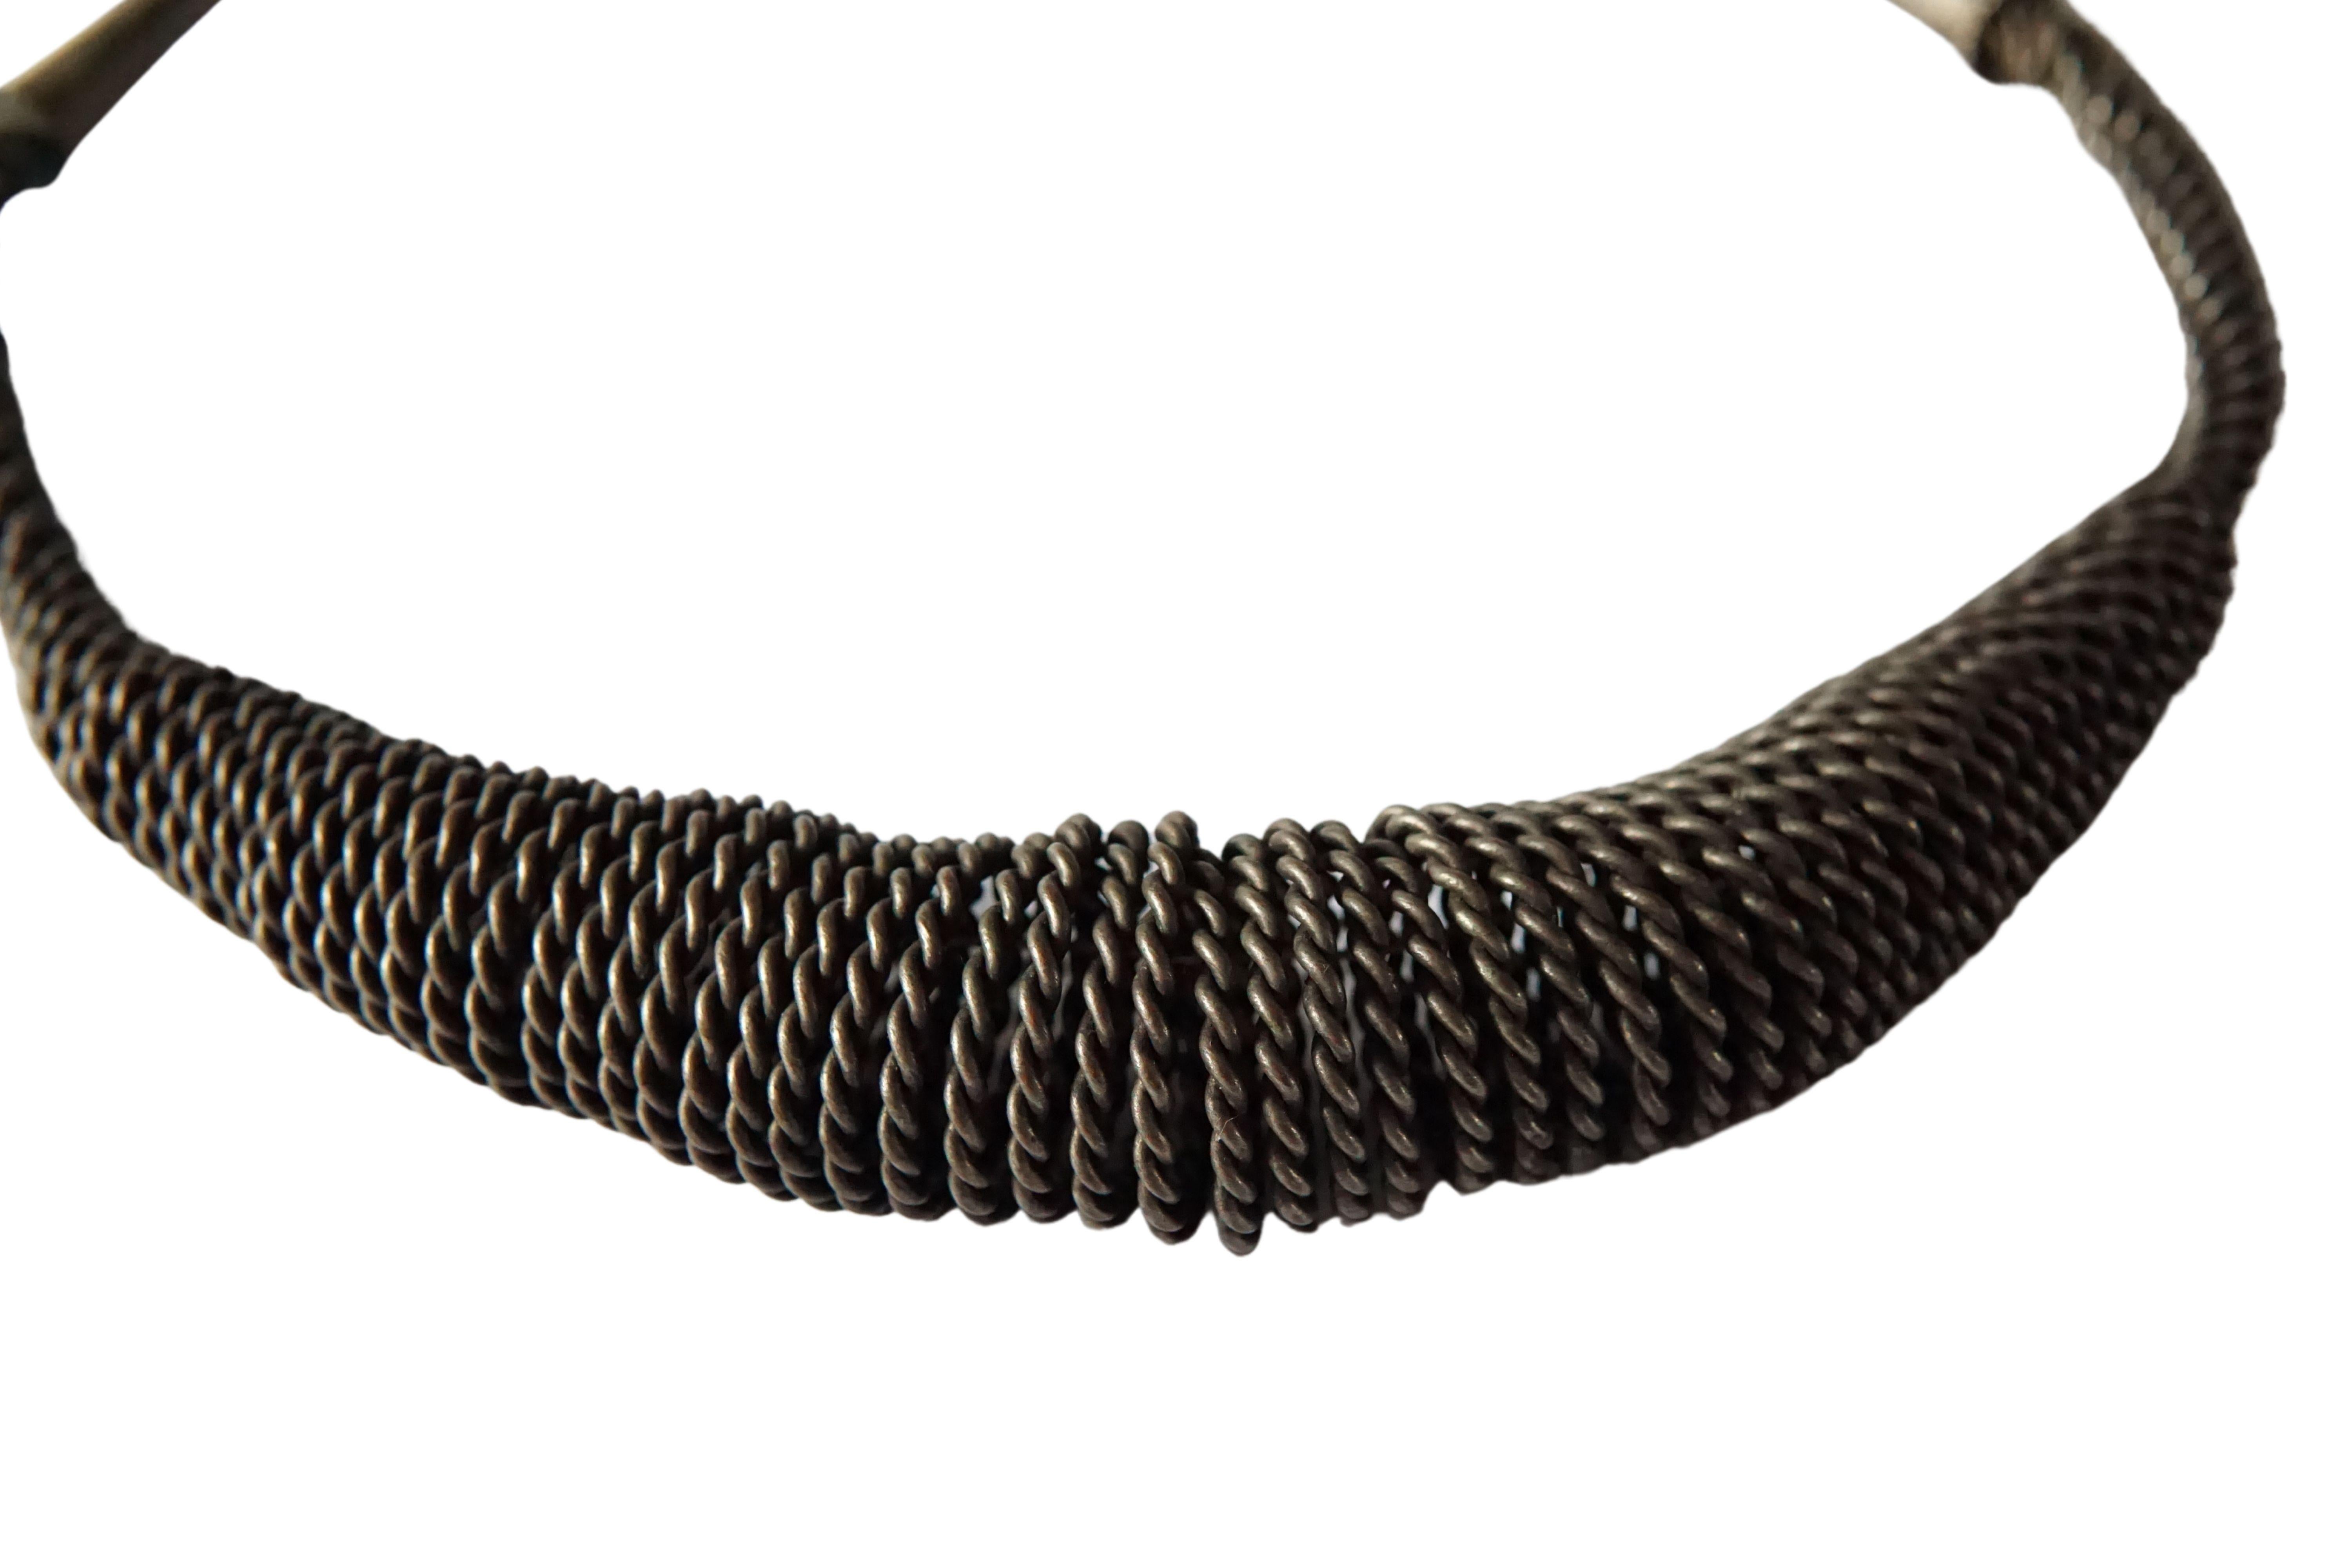 Indonesian Nias Tribe 'Nifatali-tali' Hand-Woven Wire Necklace, Indonesia c. 1900 For Sale